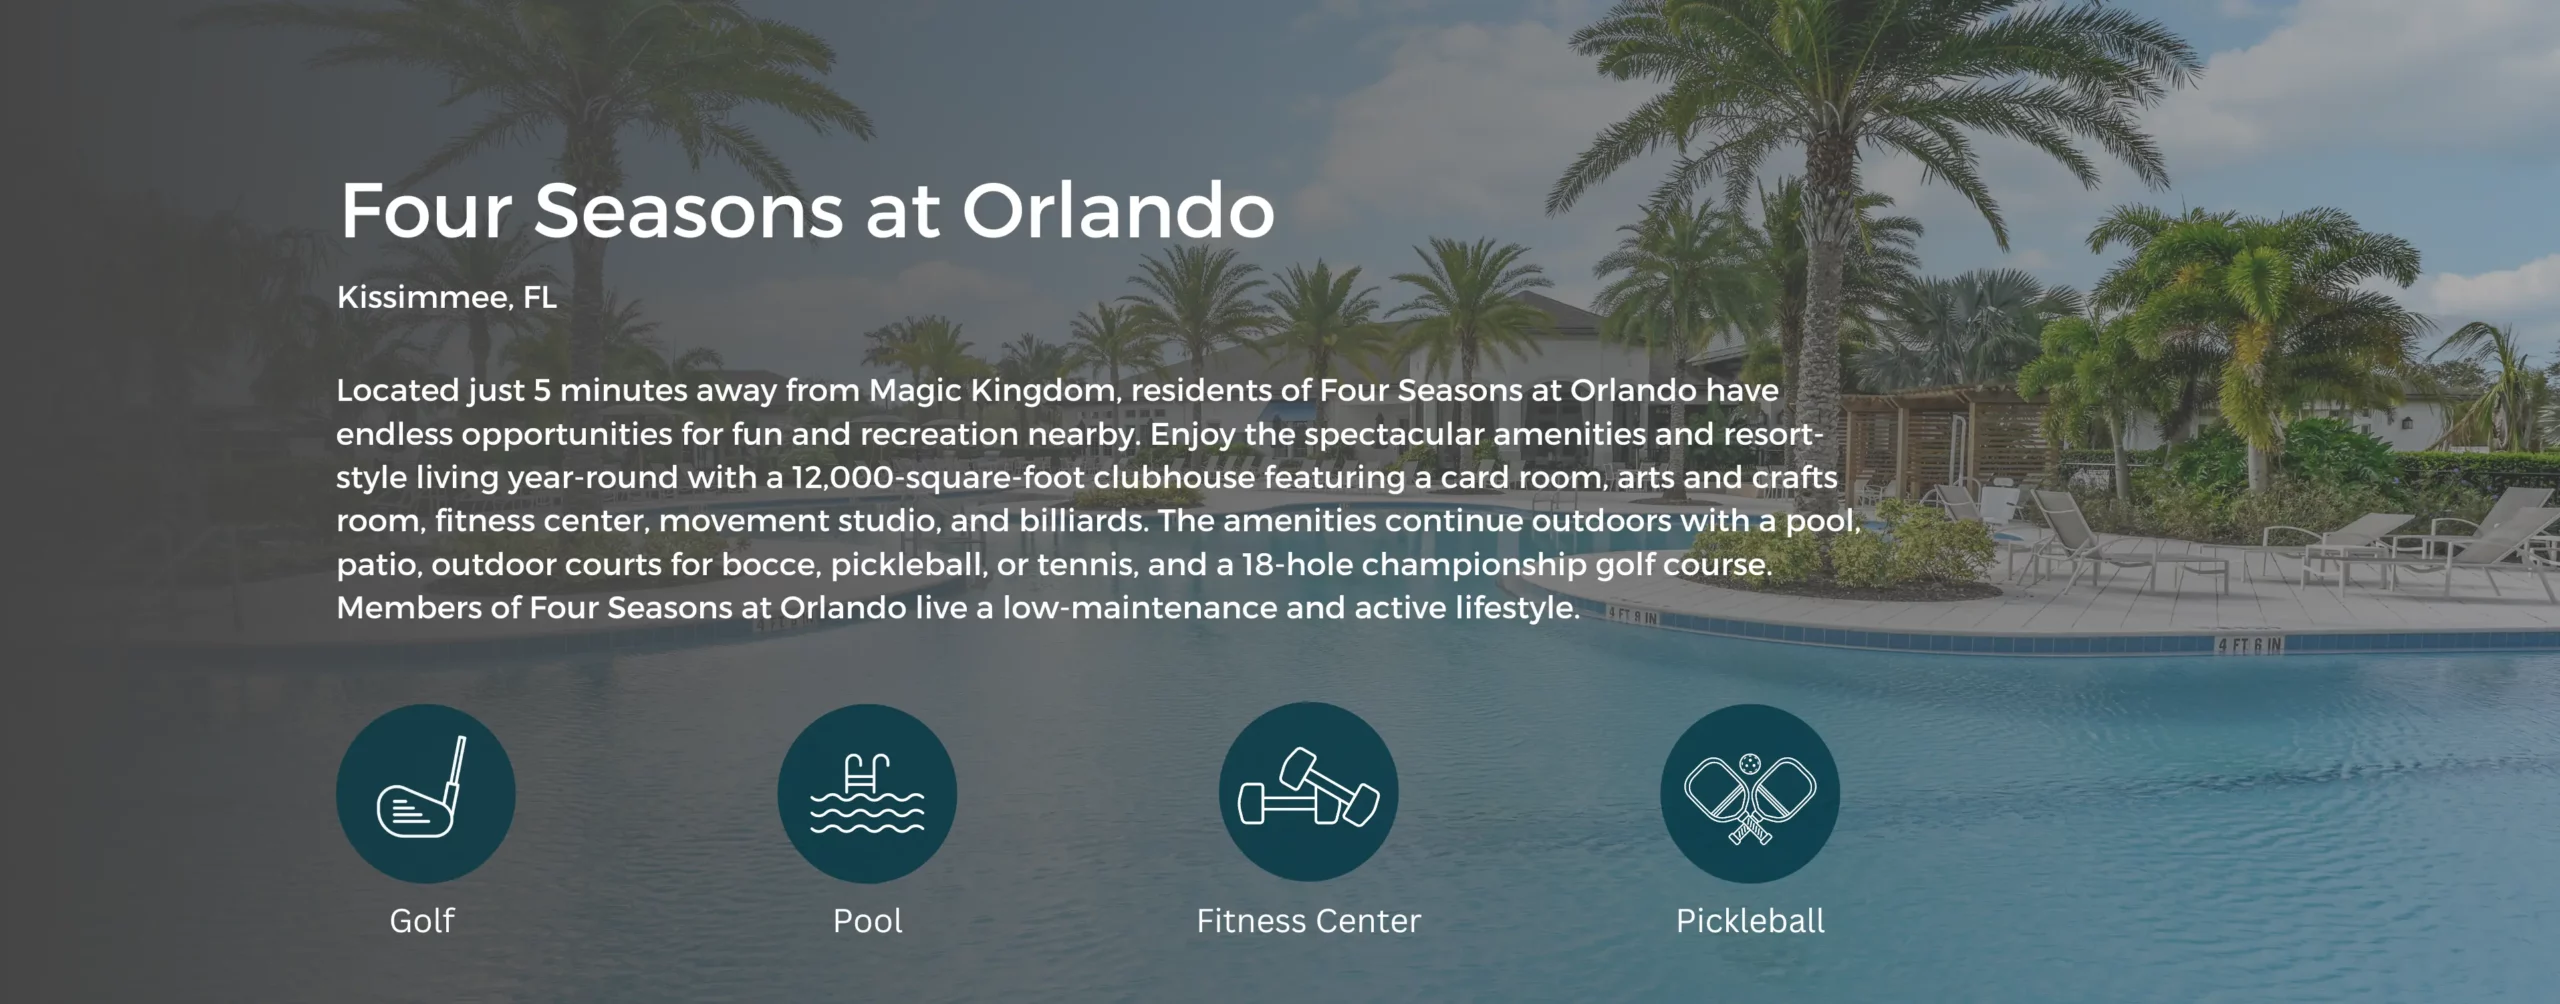 Icons that show Golf, Pool, Fitness Center, and Pickleball. Background image is an outdoor pool.